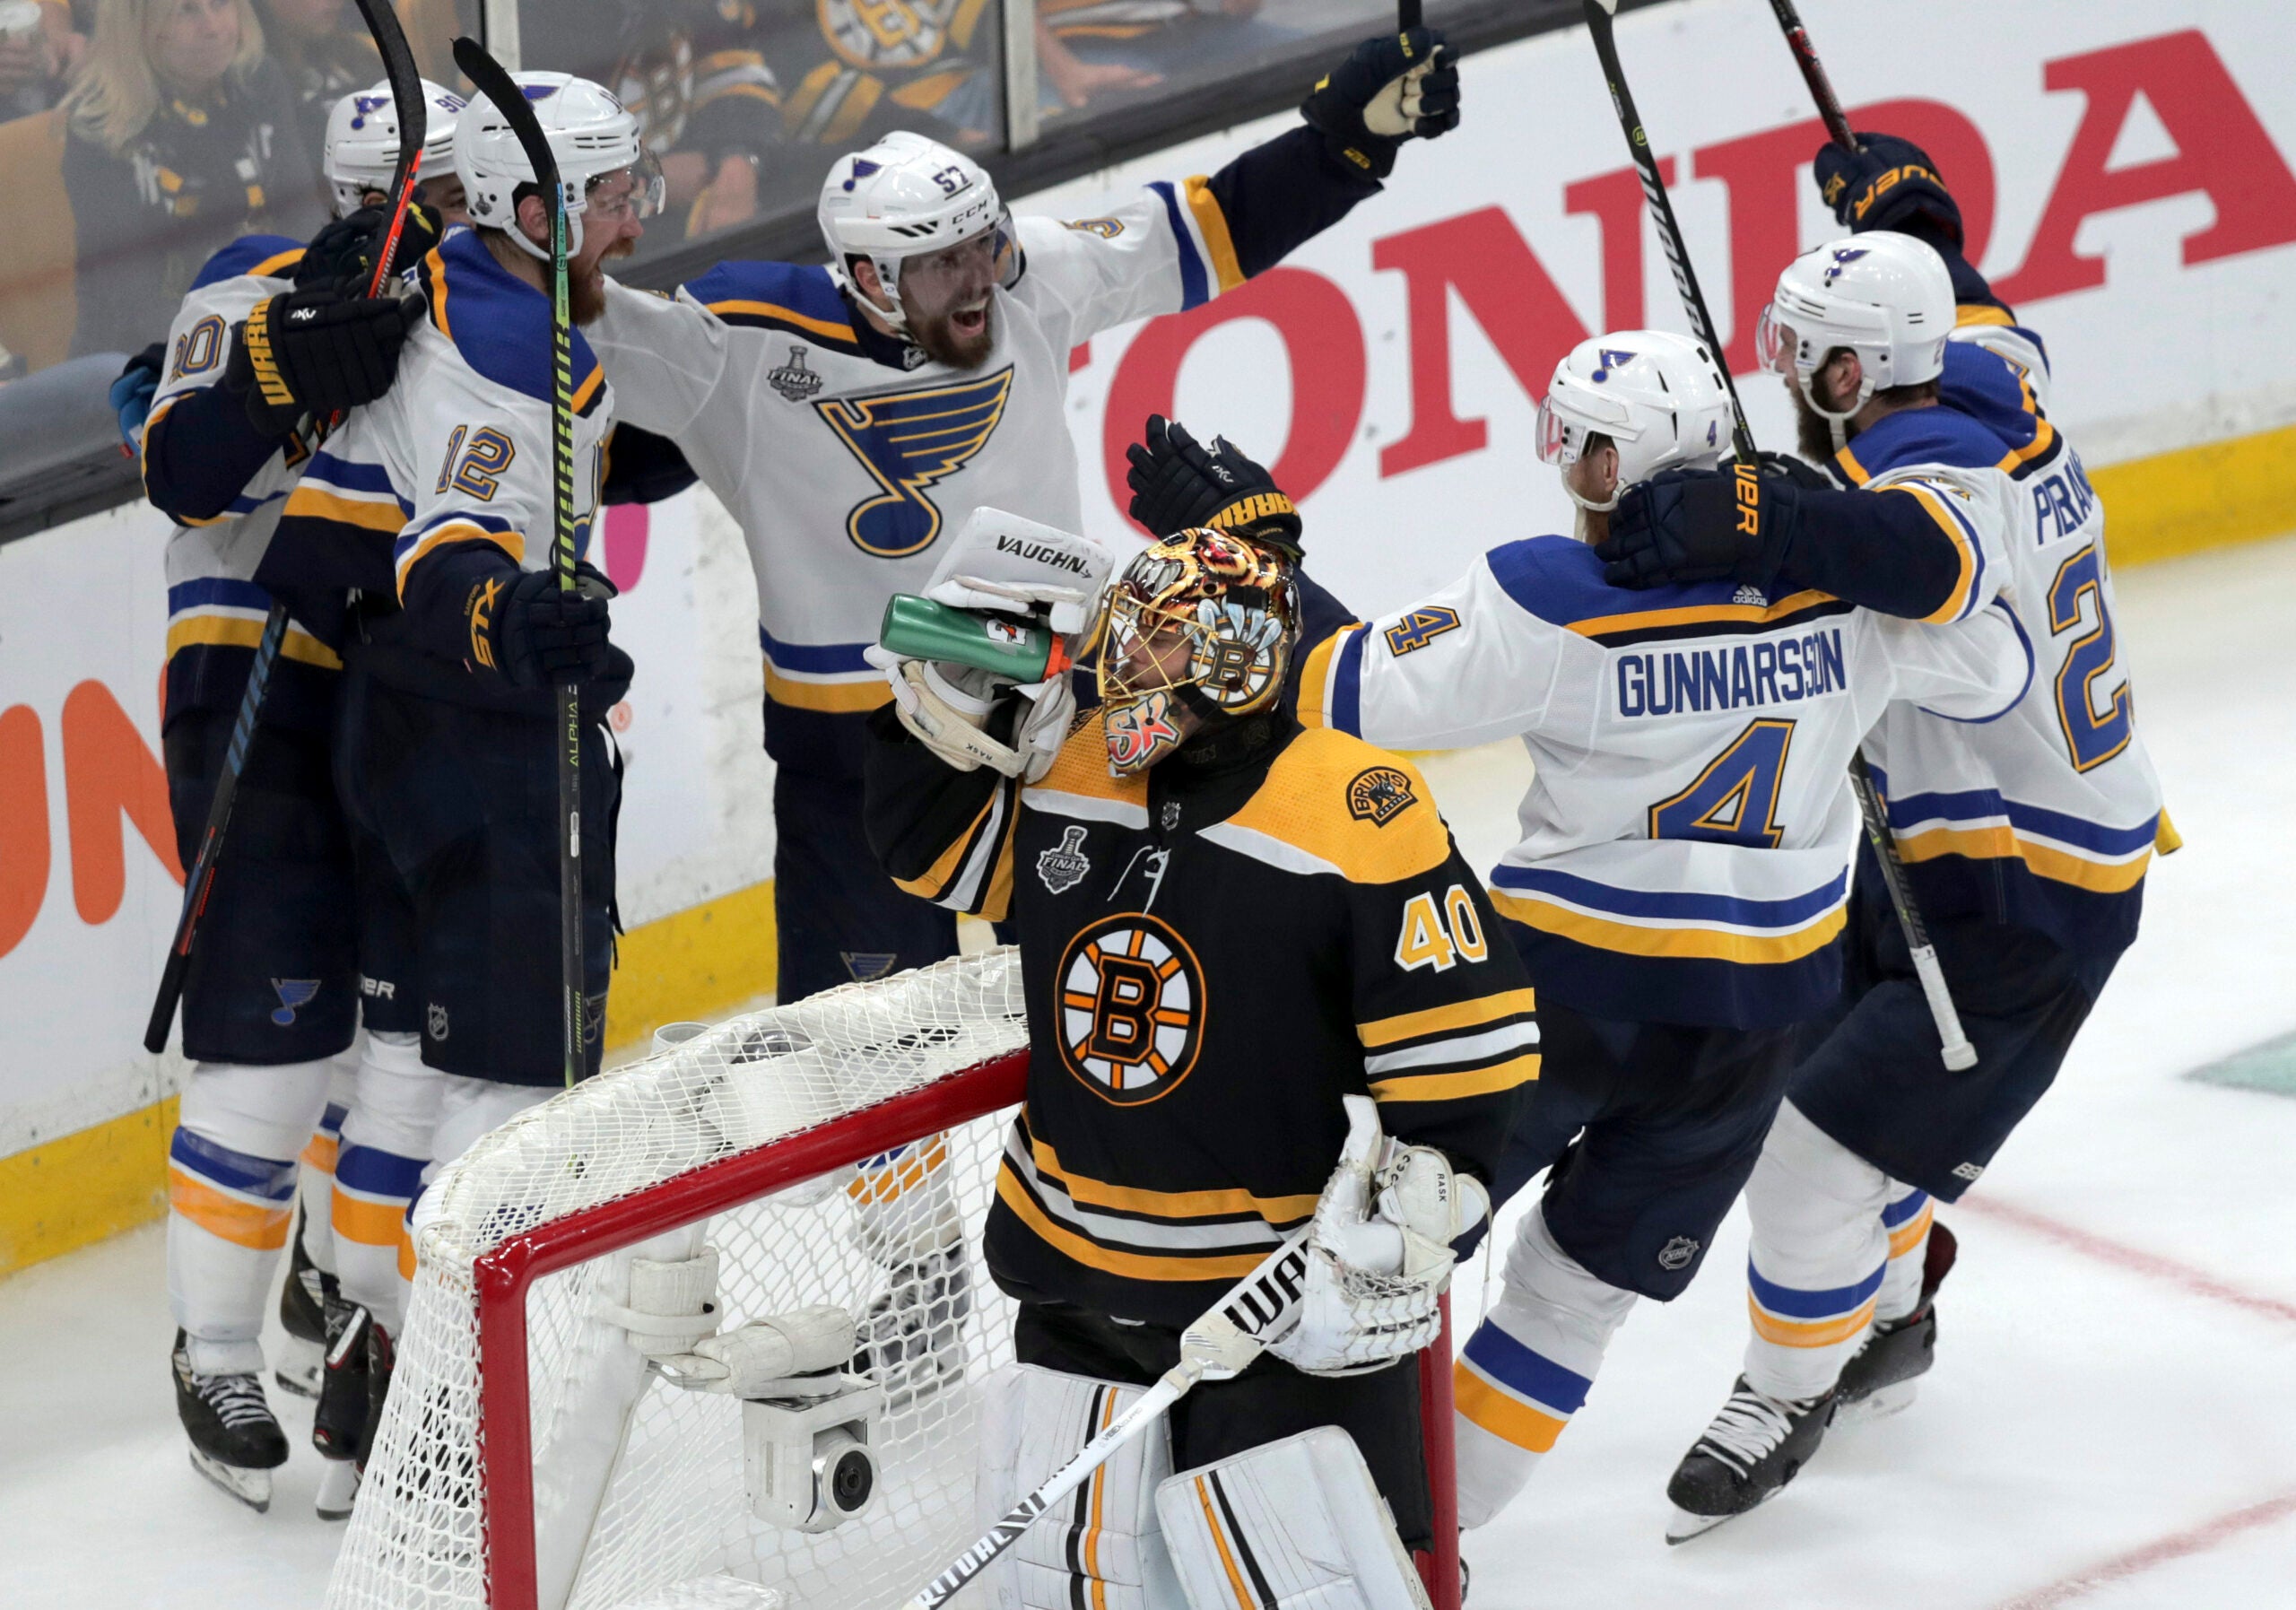 St. Louis Blues beat Boston Bruins for first Stanley Cup Final win